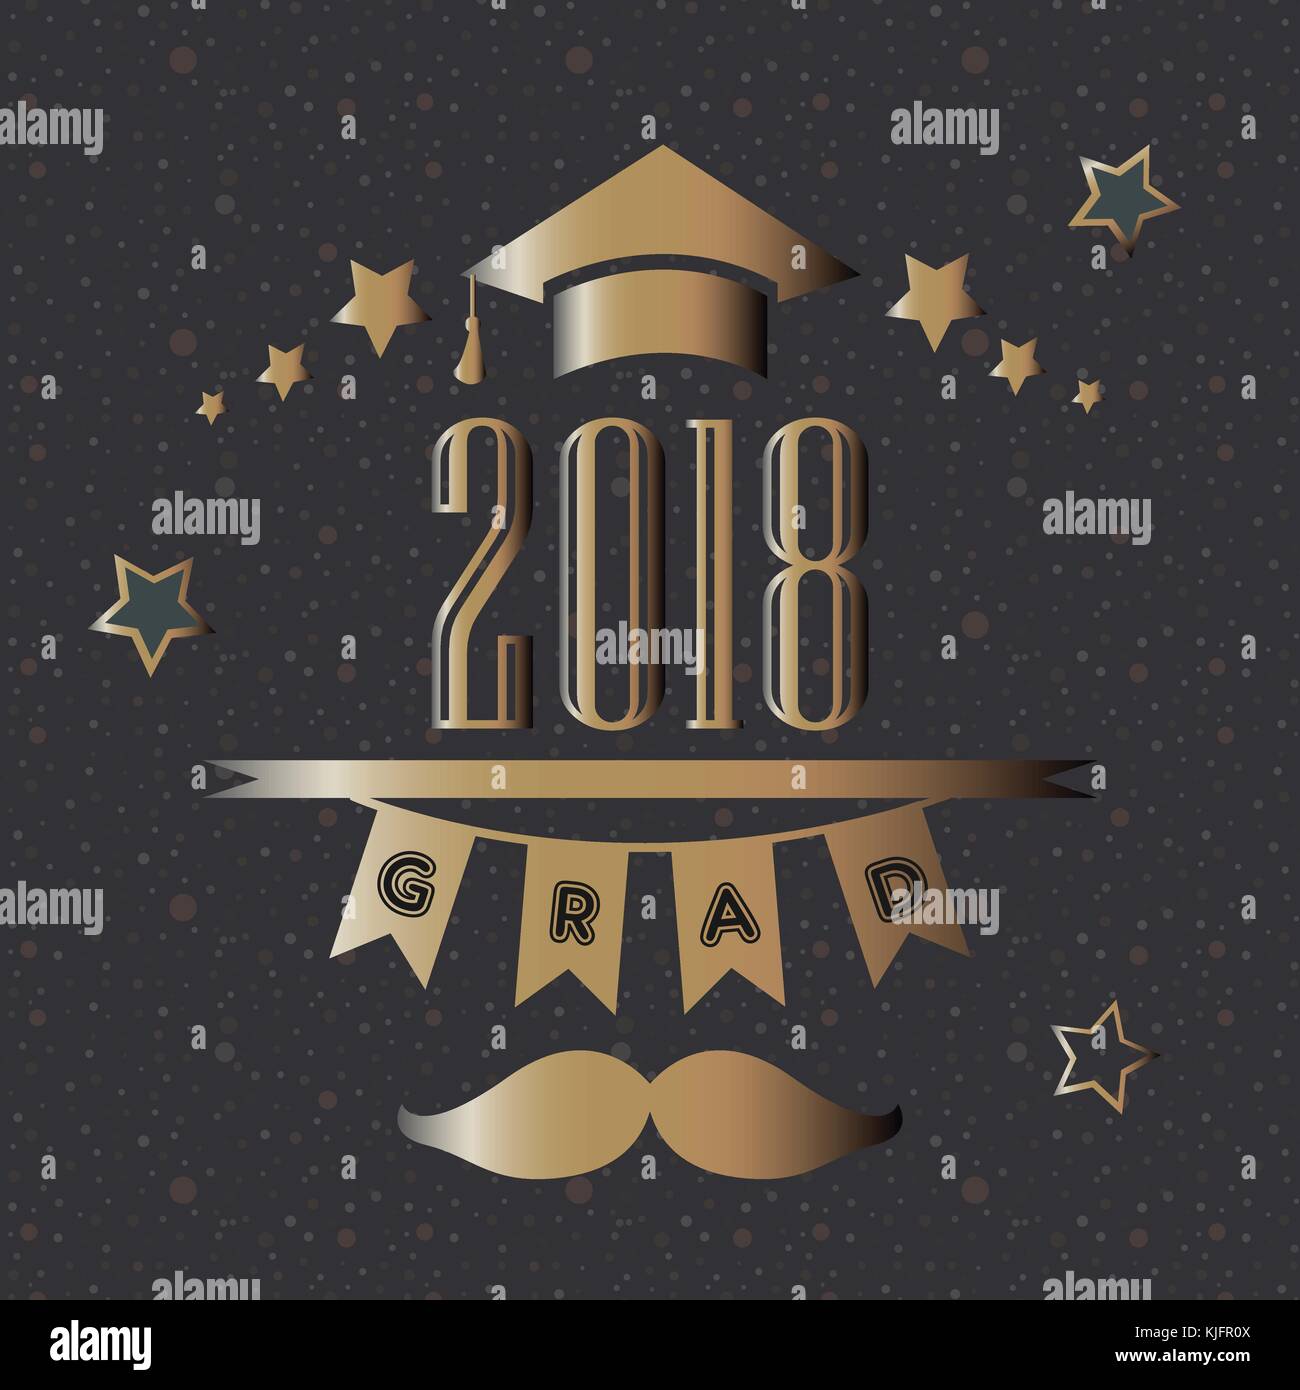 Graduation Party Announcement With Golden Text And Elements